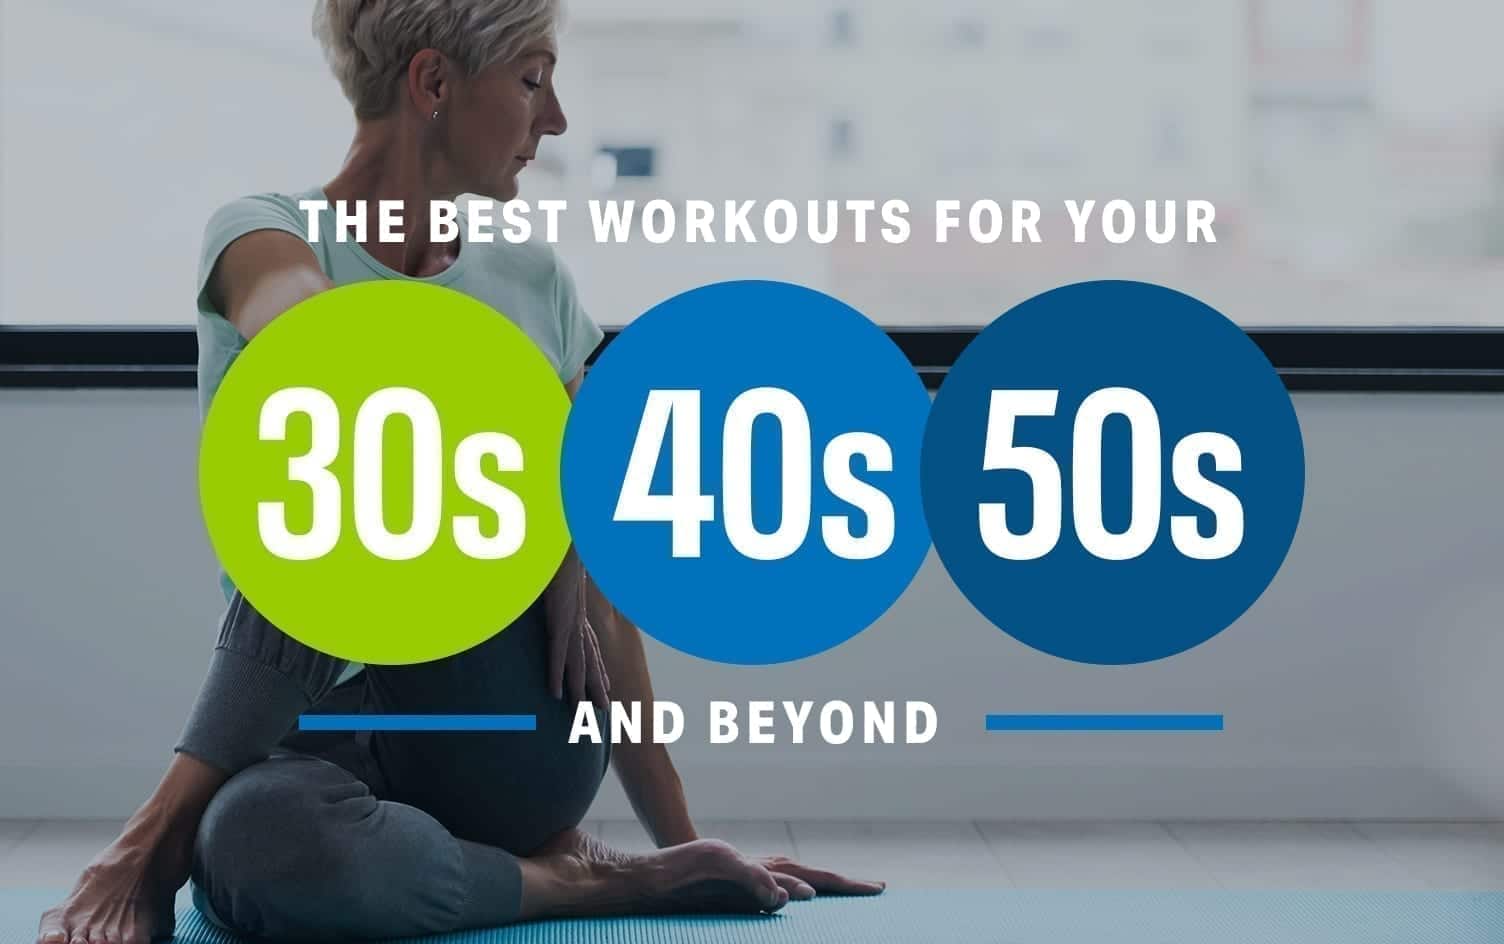 The Best Workouts For Your 30s, 40s, 50s and Beyond